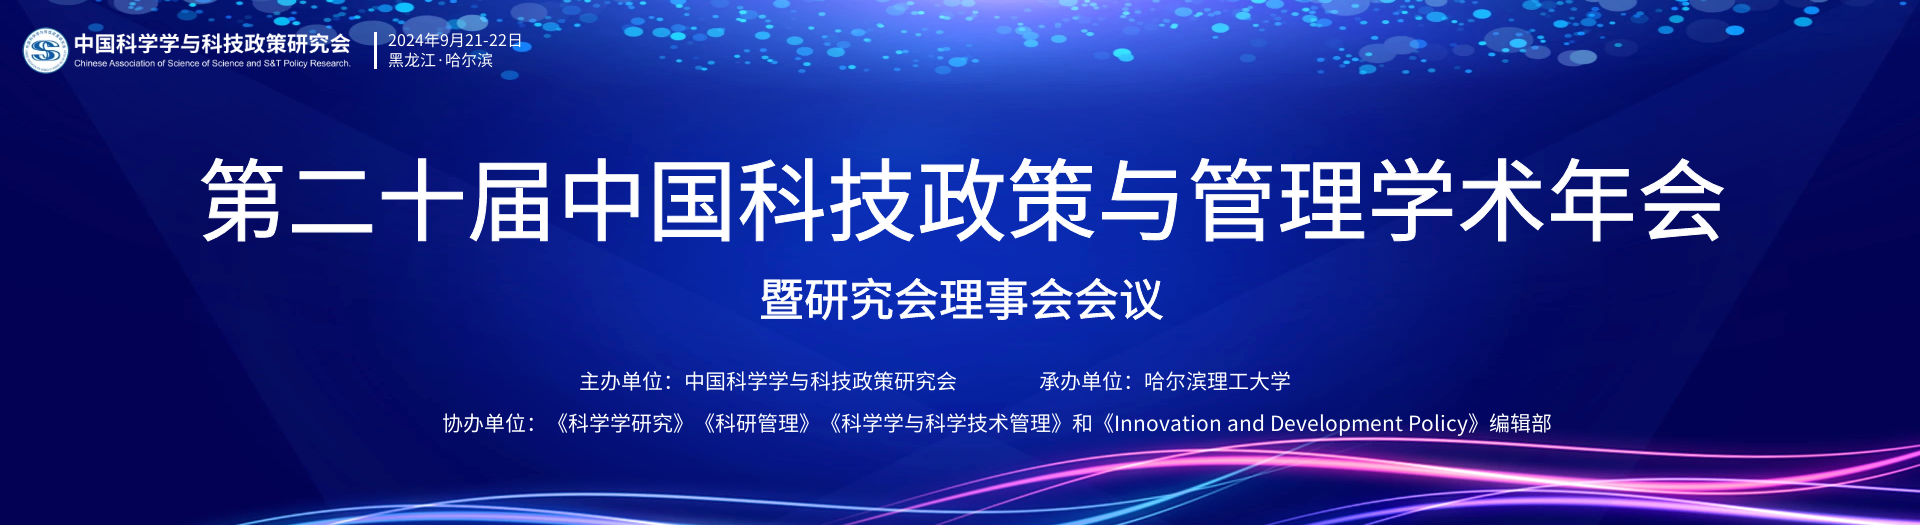  The 20th China Science and Technology Policy and Management Annual Conference and Council of Research Association